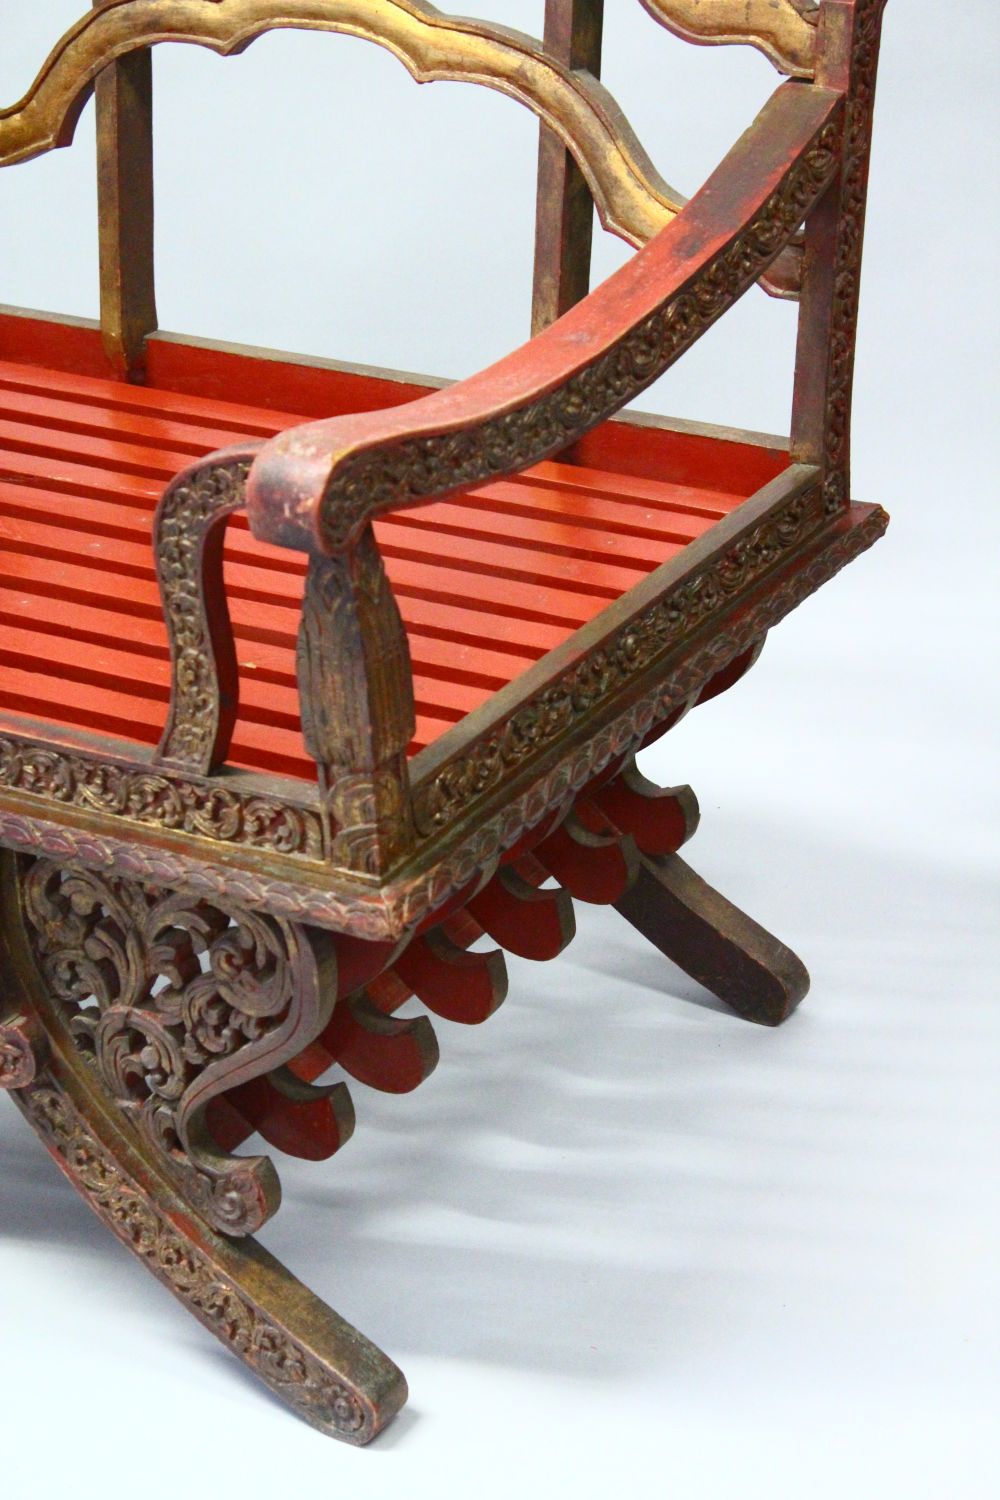 A PAIR OF 19TH/20TH CENTURY THAI CARVED HOWDAH ELEPHANT CHAIRS, profusely carved and pierced with - Image 7 of 10